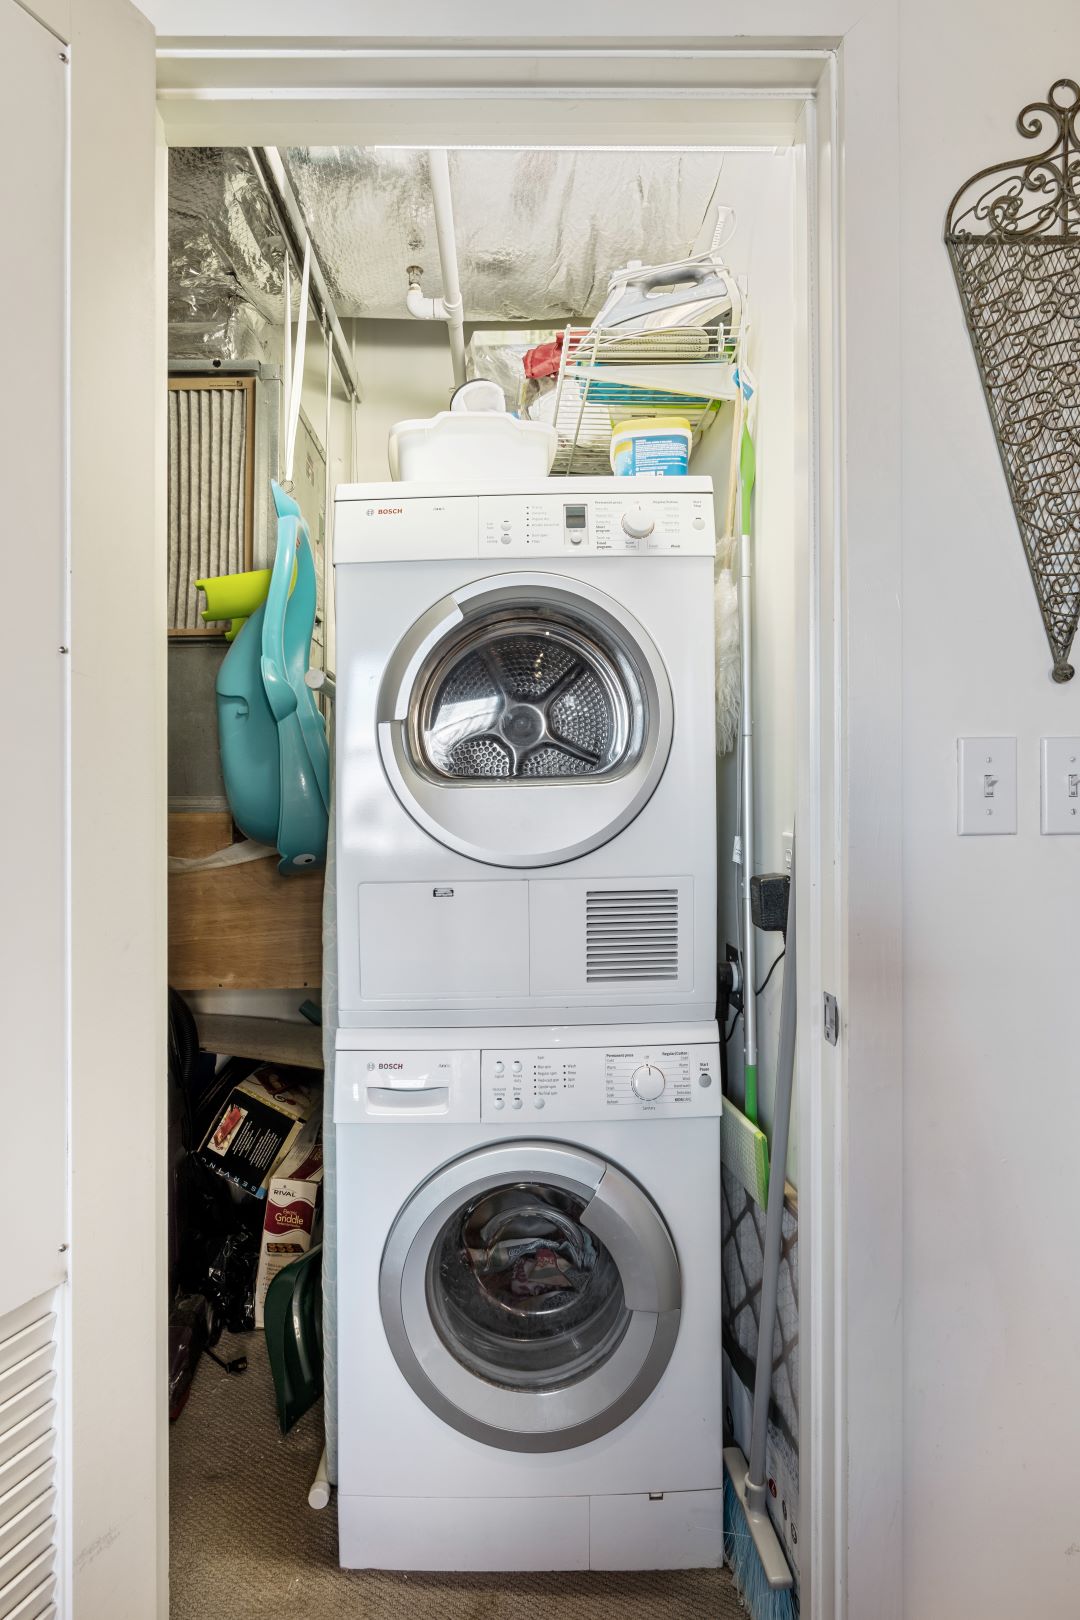 https://www.maloneyaffordable.com/wp-content/uploads/2022/08/washer-and-dryer-unit.jpg